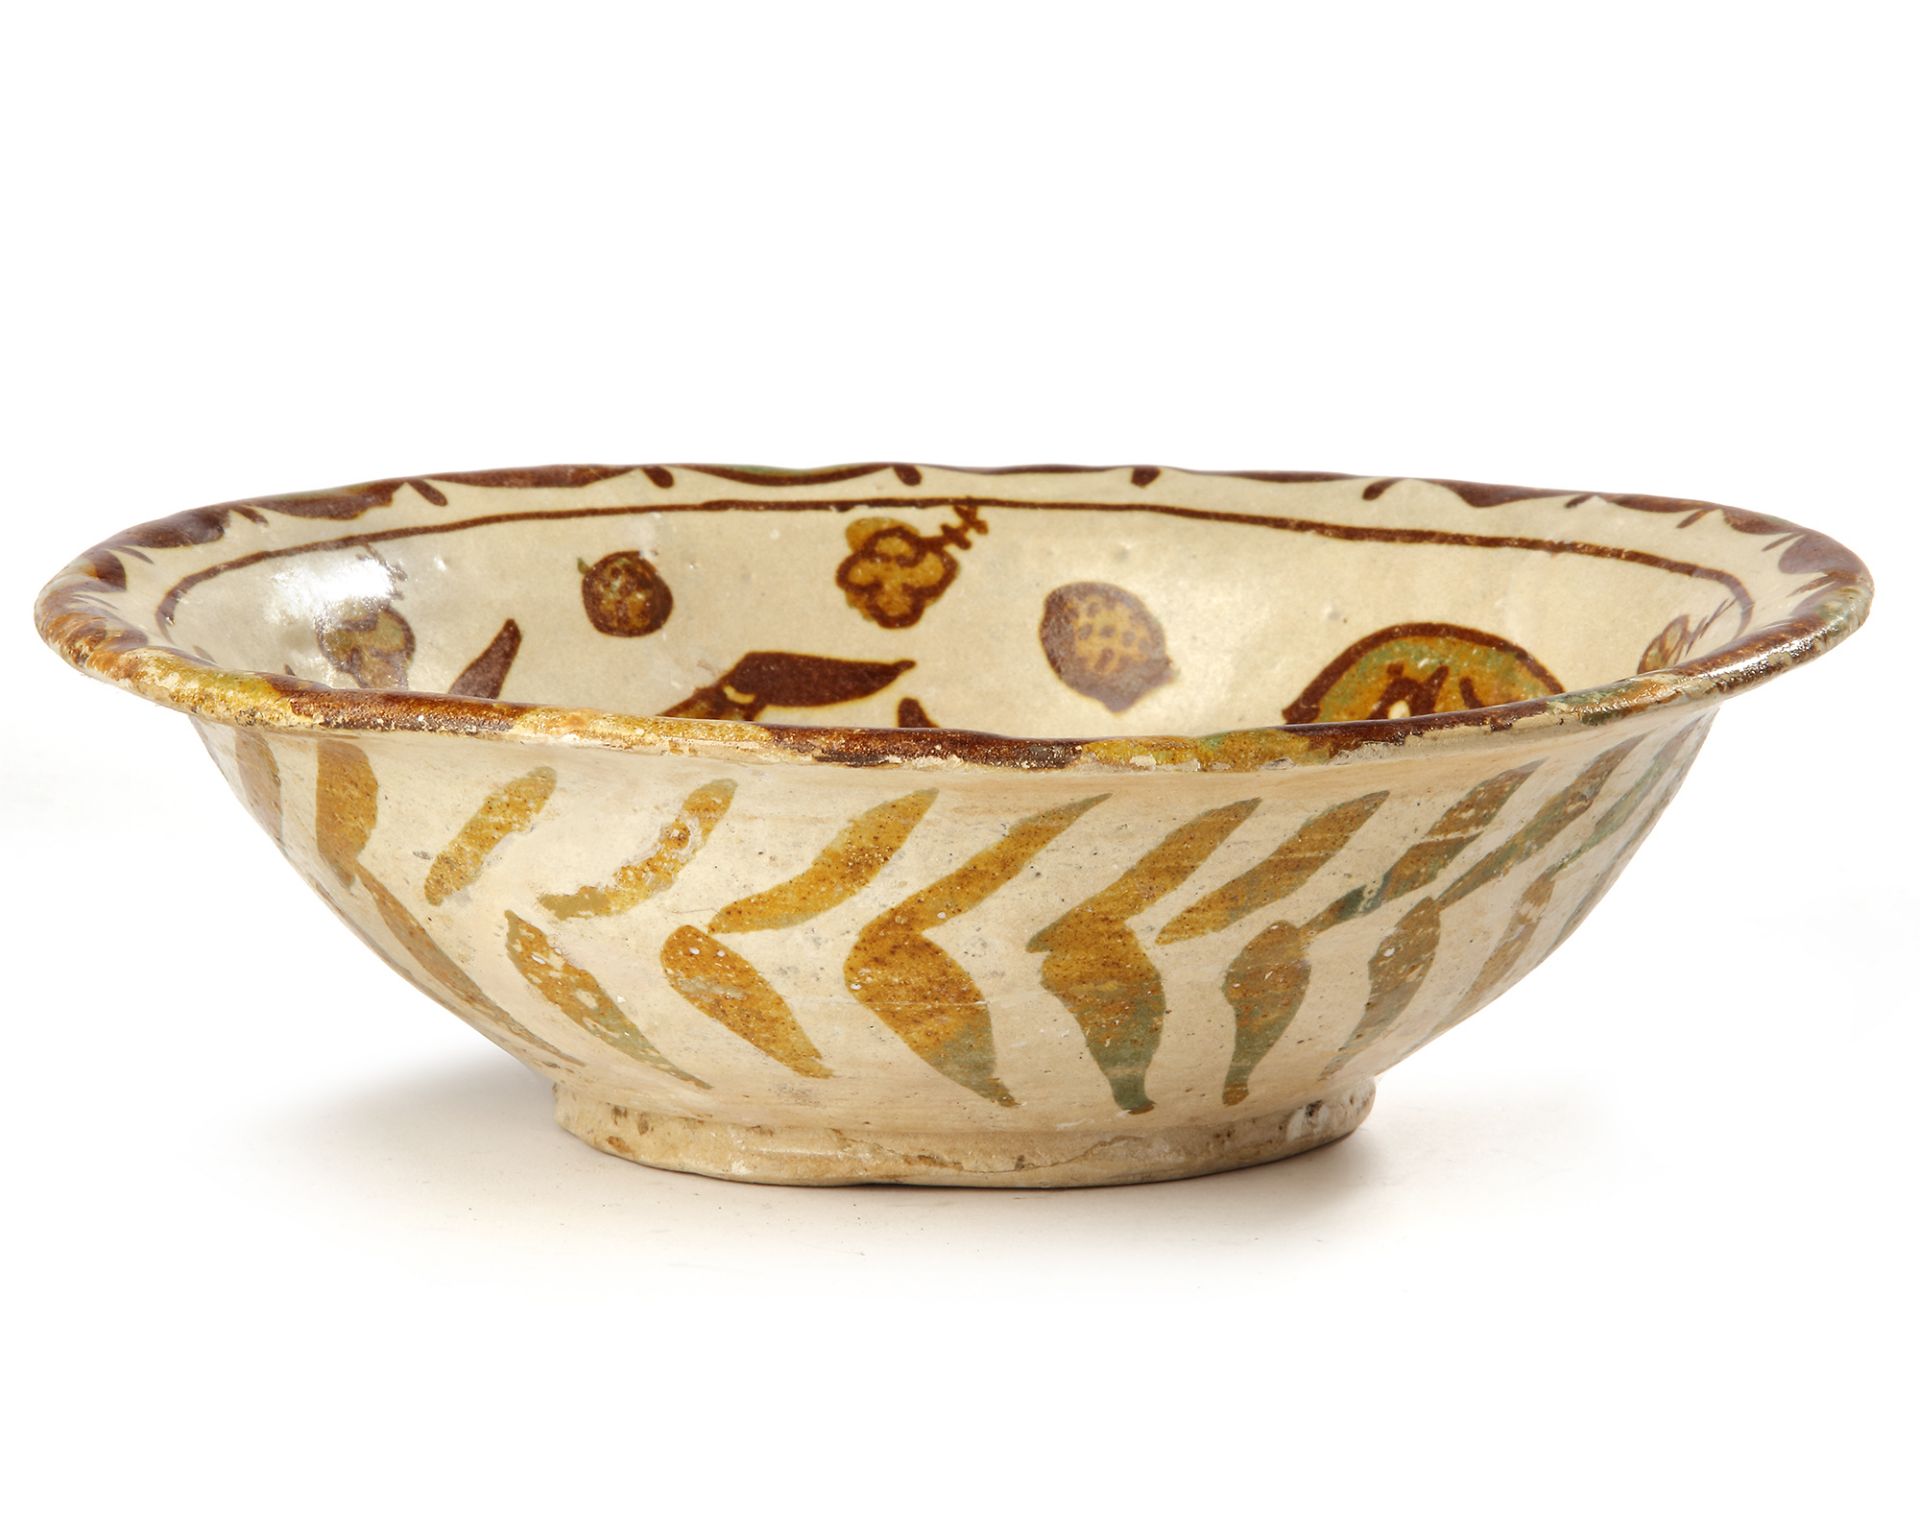 A FIGURAL ABBASID LUSTRE BOWL, MESOPOTAMIA OR CENTRAL ASIA, 9TH CENTURY - Image 6 of 8